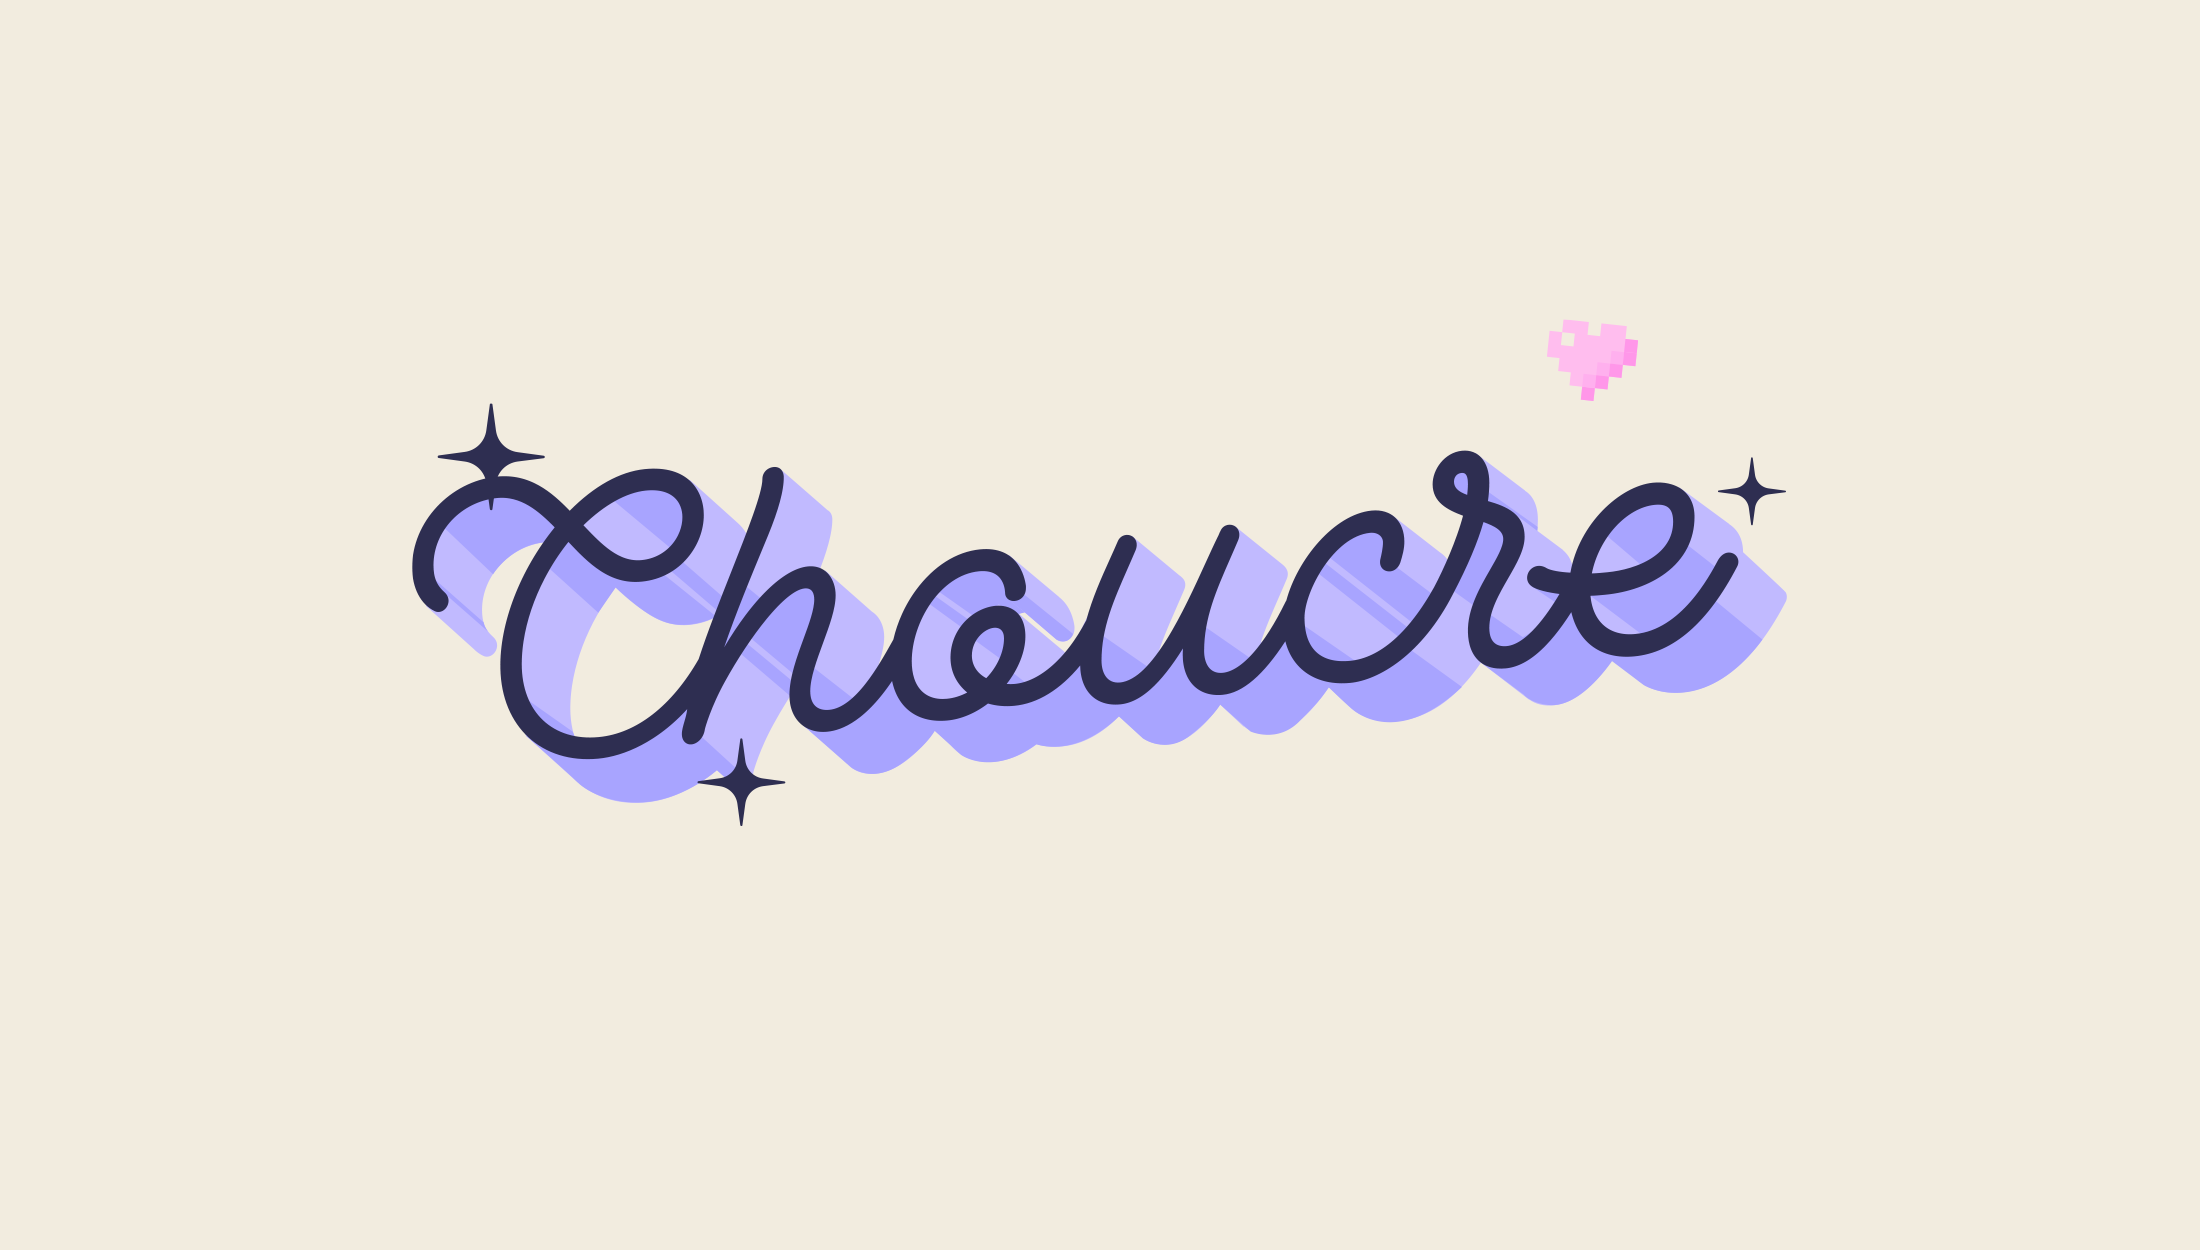 Logo design for Choucre, 00s inspired candle brand - designed by Kaye Huett, Wiltshire-based graphic designer